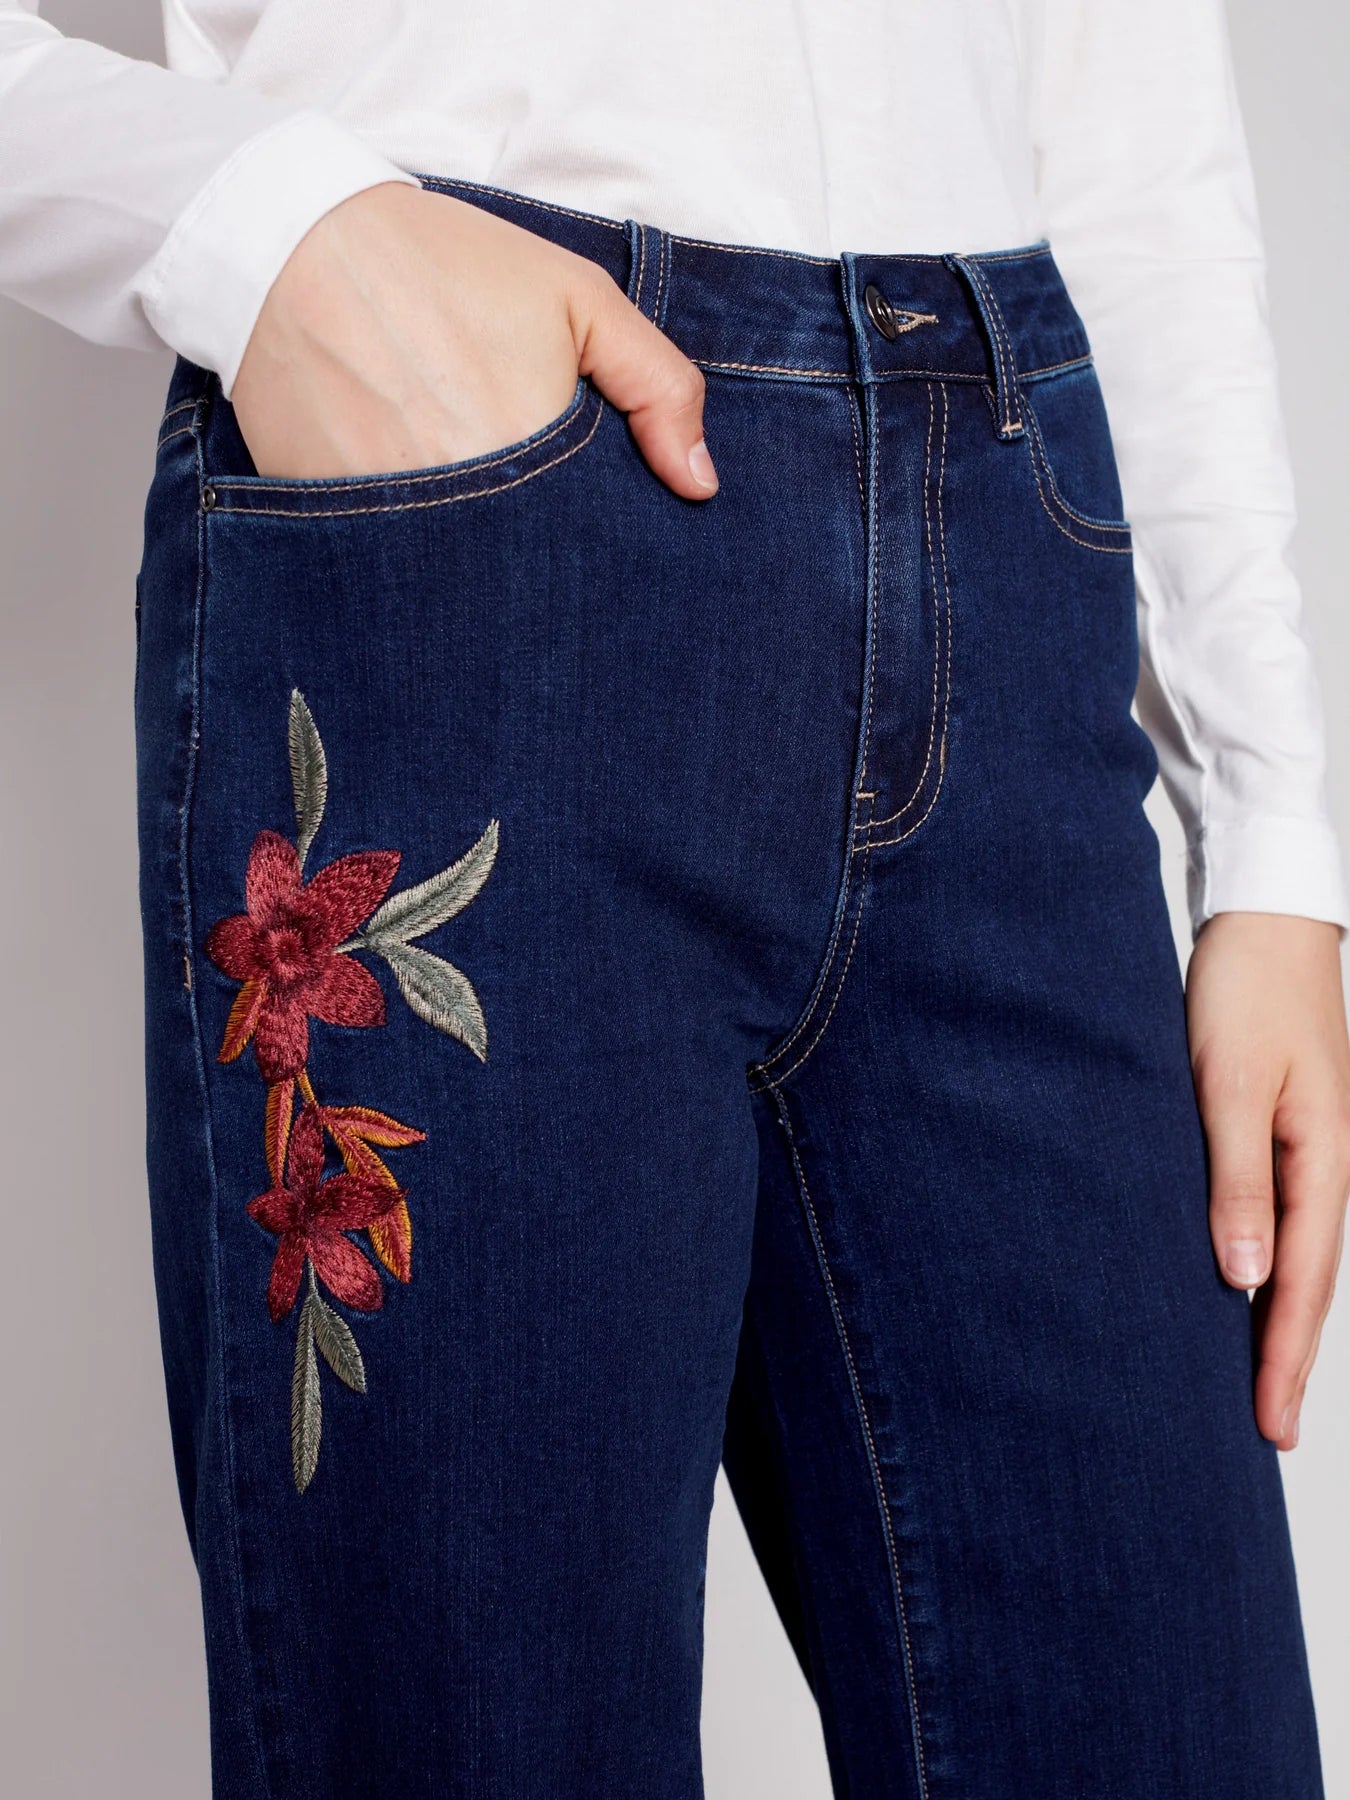 Aesthetic Floral Embroidered Flowers Pocket Jeans Casual Pants – sunifty